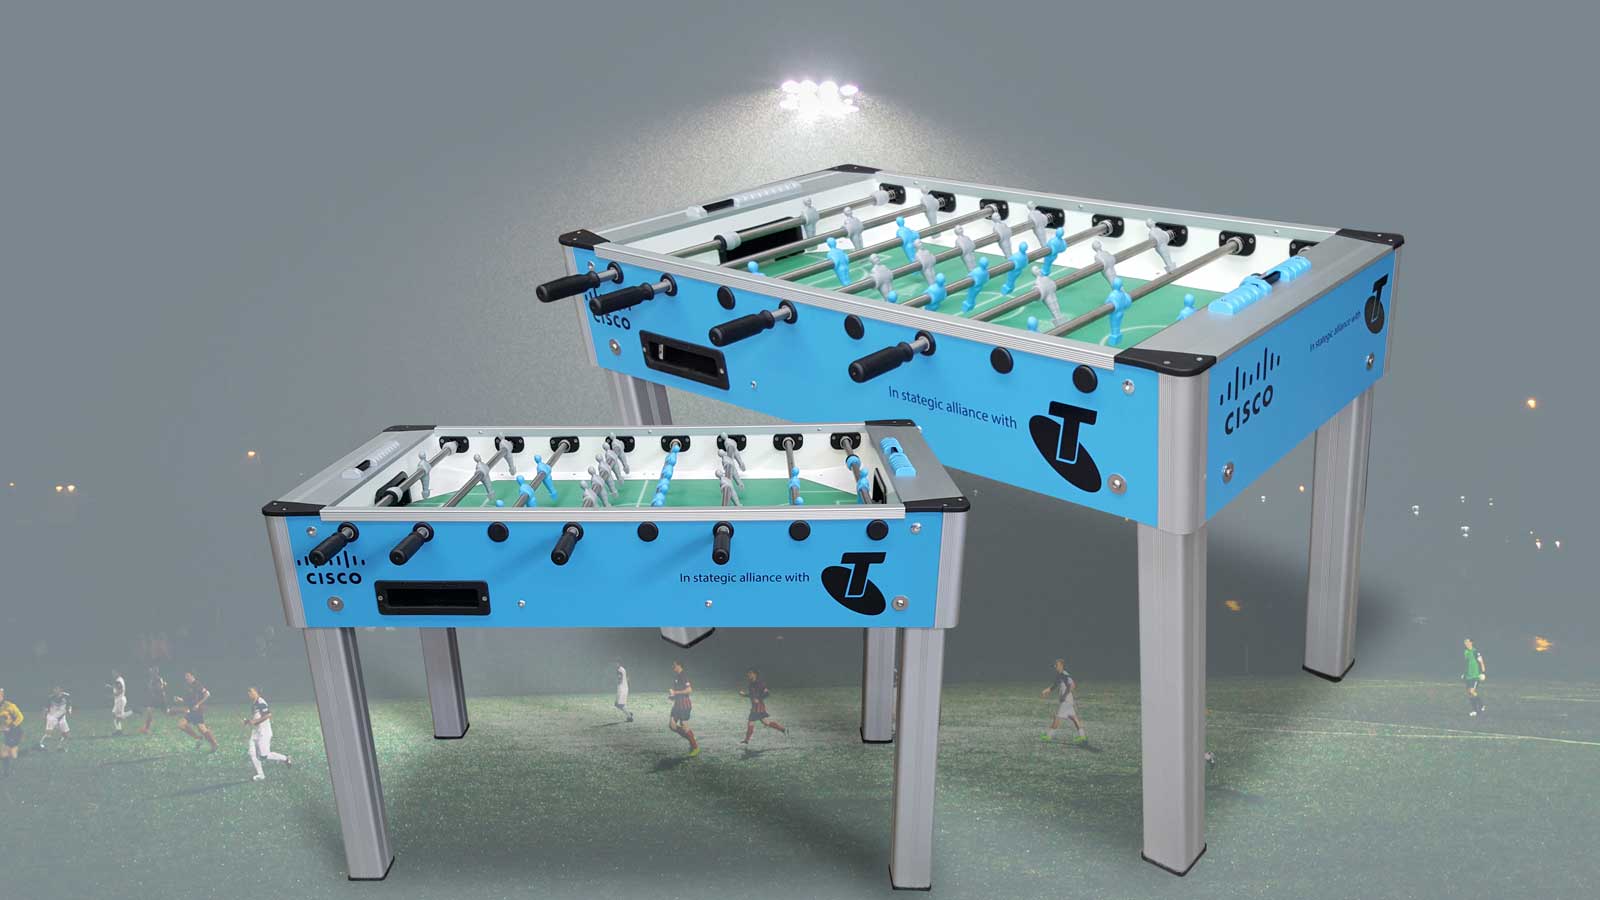 customized branded soccer table for telstra and cisco